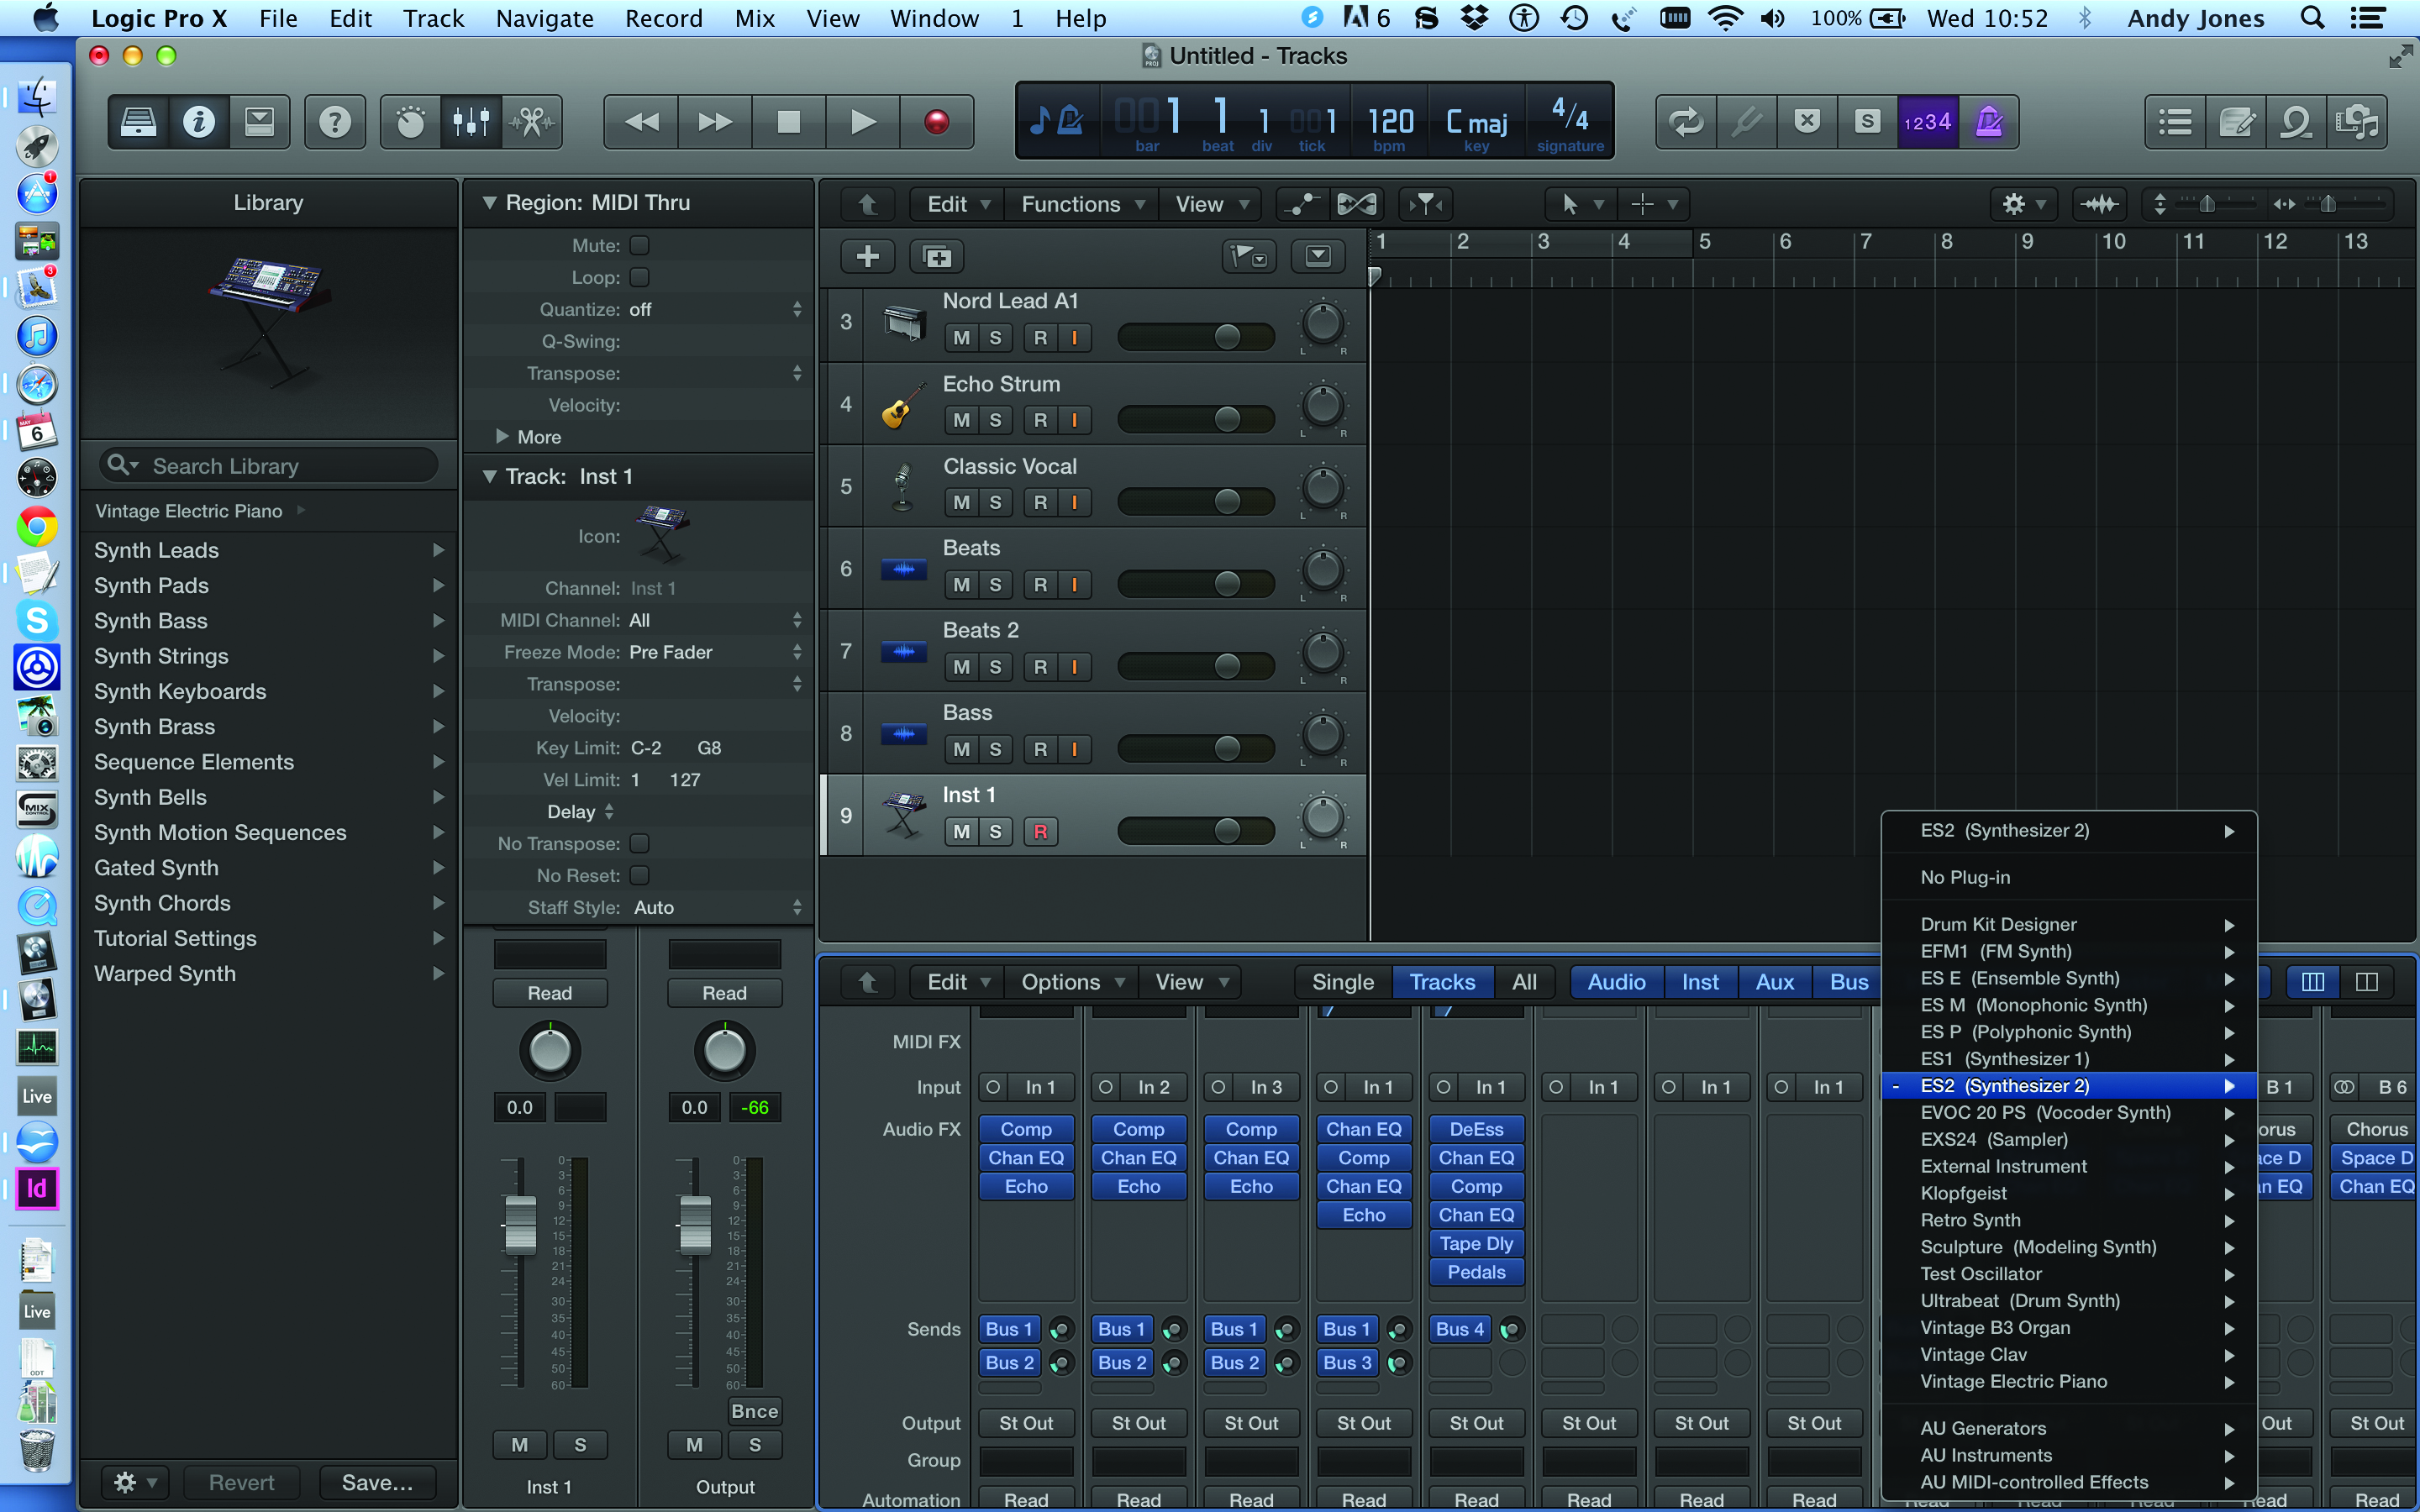 download more instruments for logic pro x